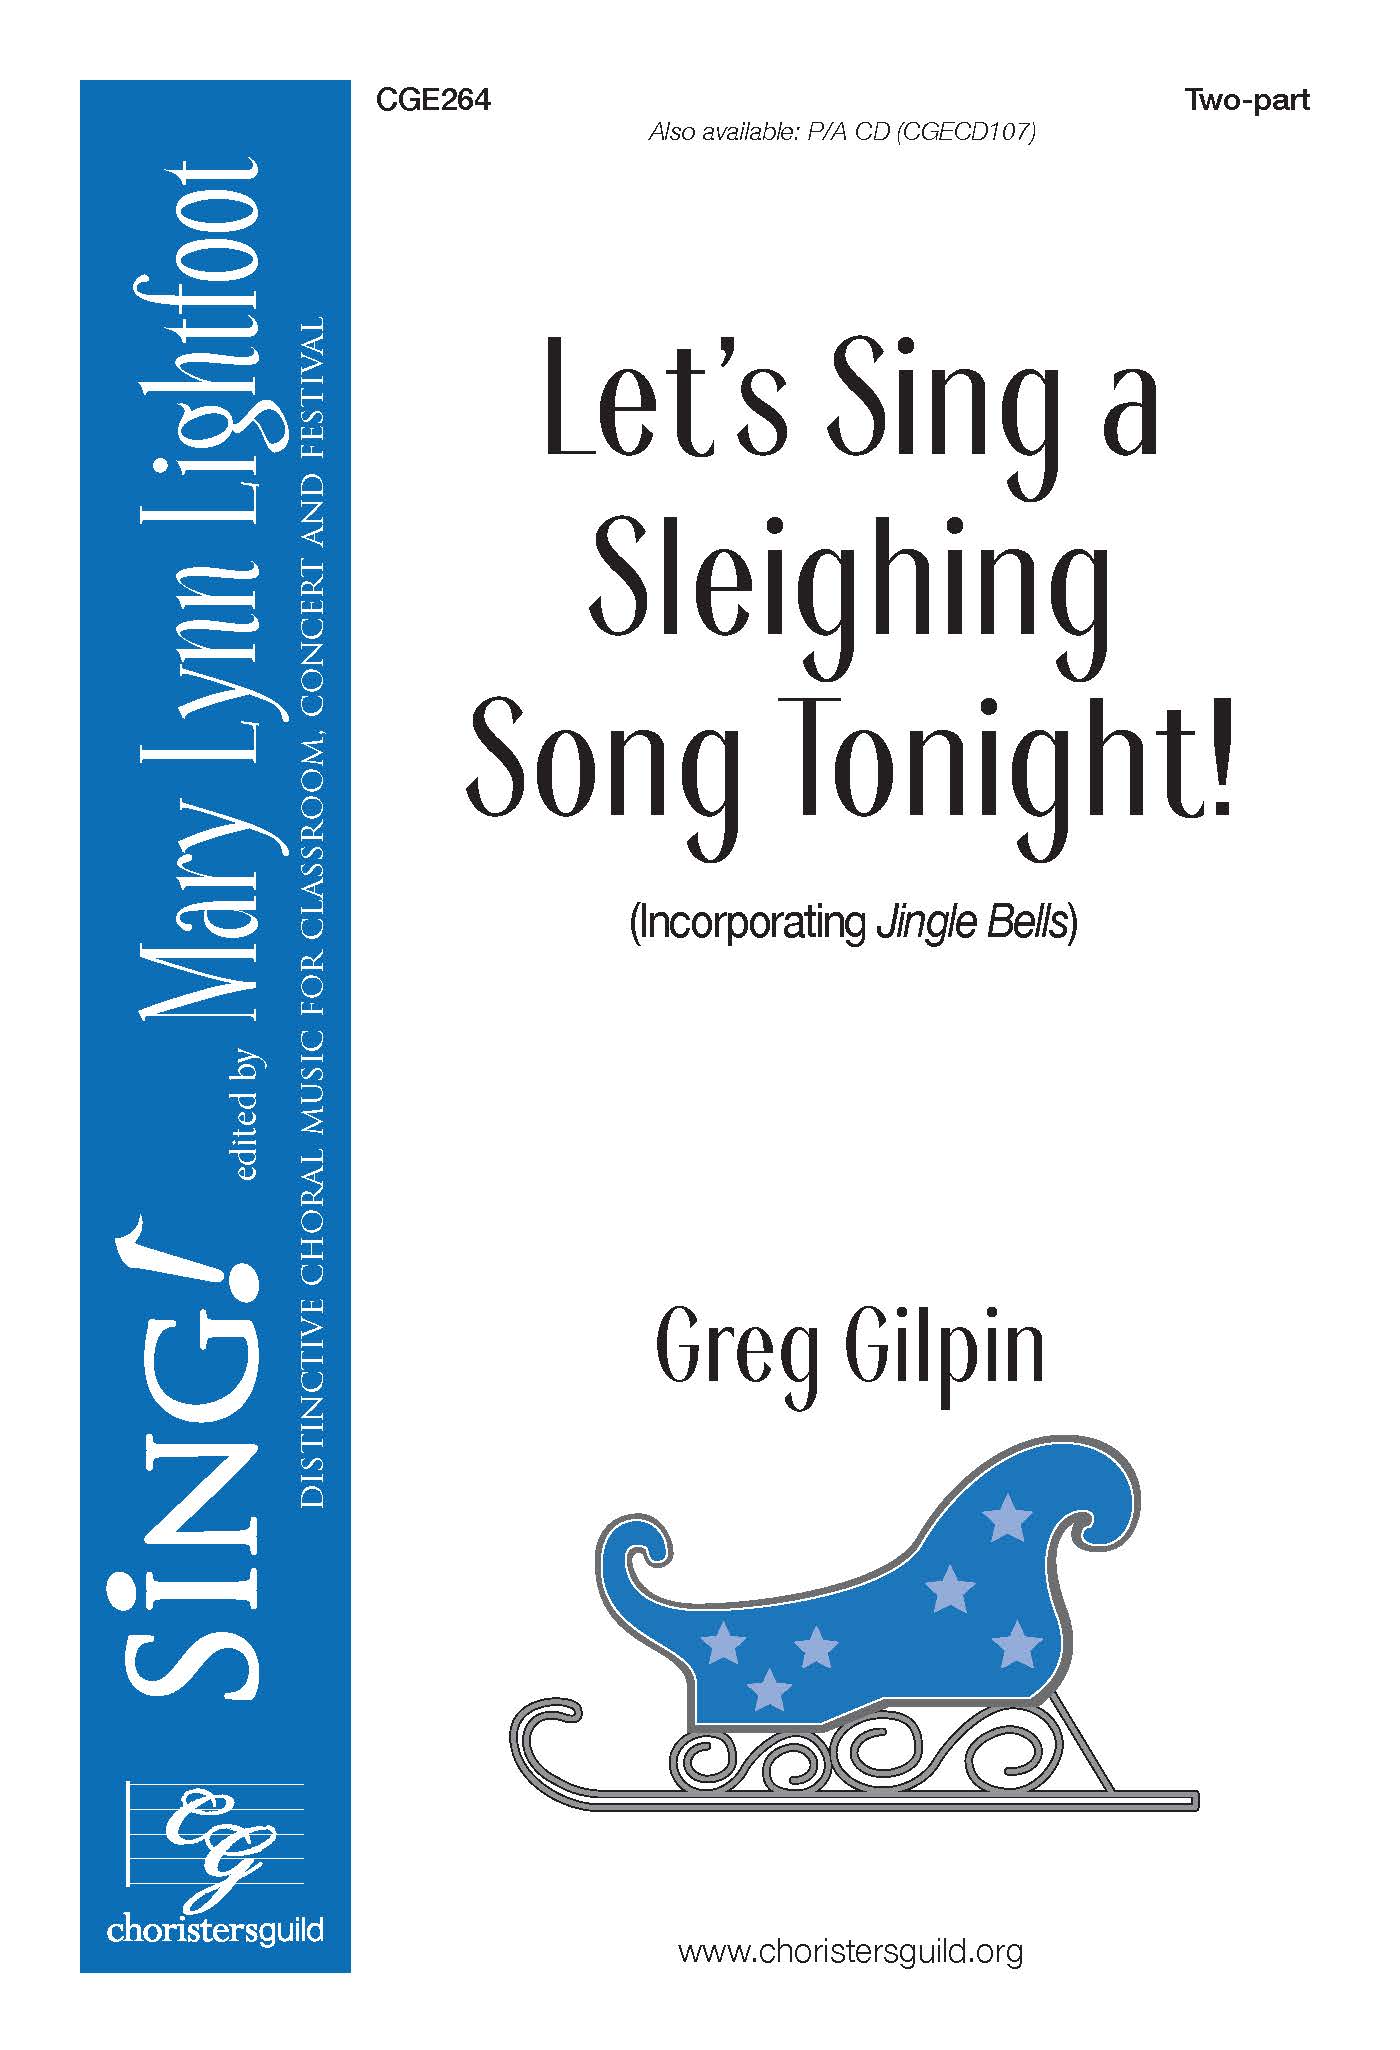 Let's Sing a Sleighing Song Tonight!